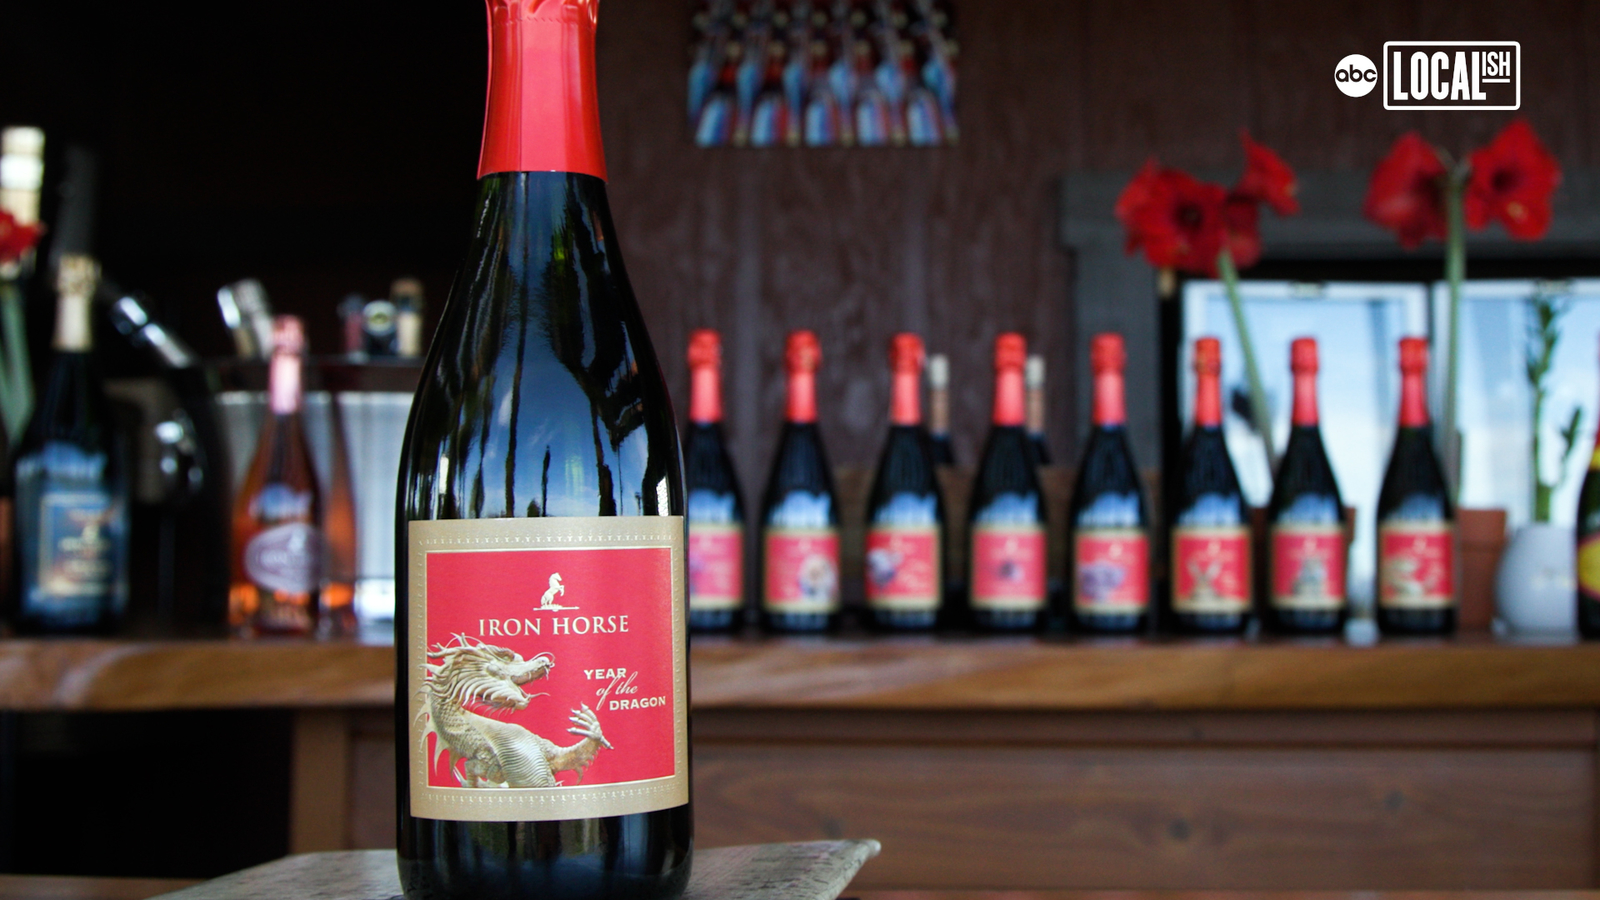 World-renowned winery Iron Horse Vineyards in Sebastopol, California developed a special brut for Lunar New Year [Video]